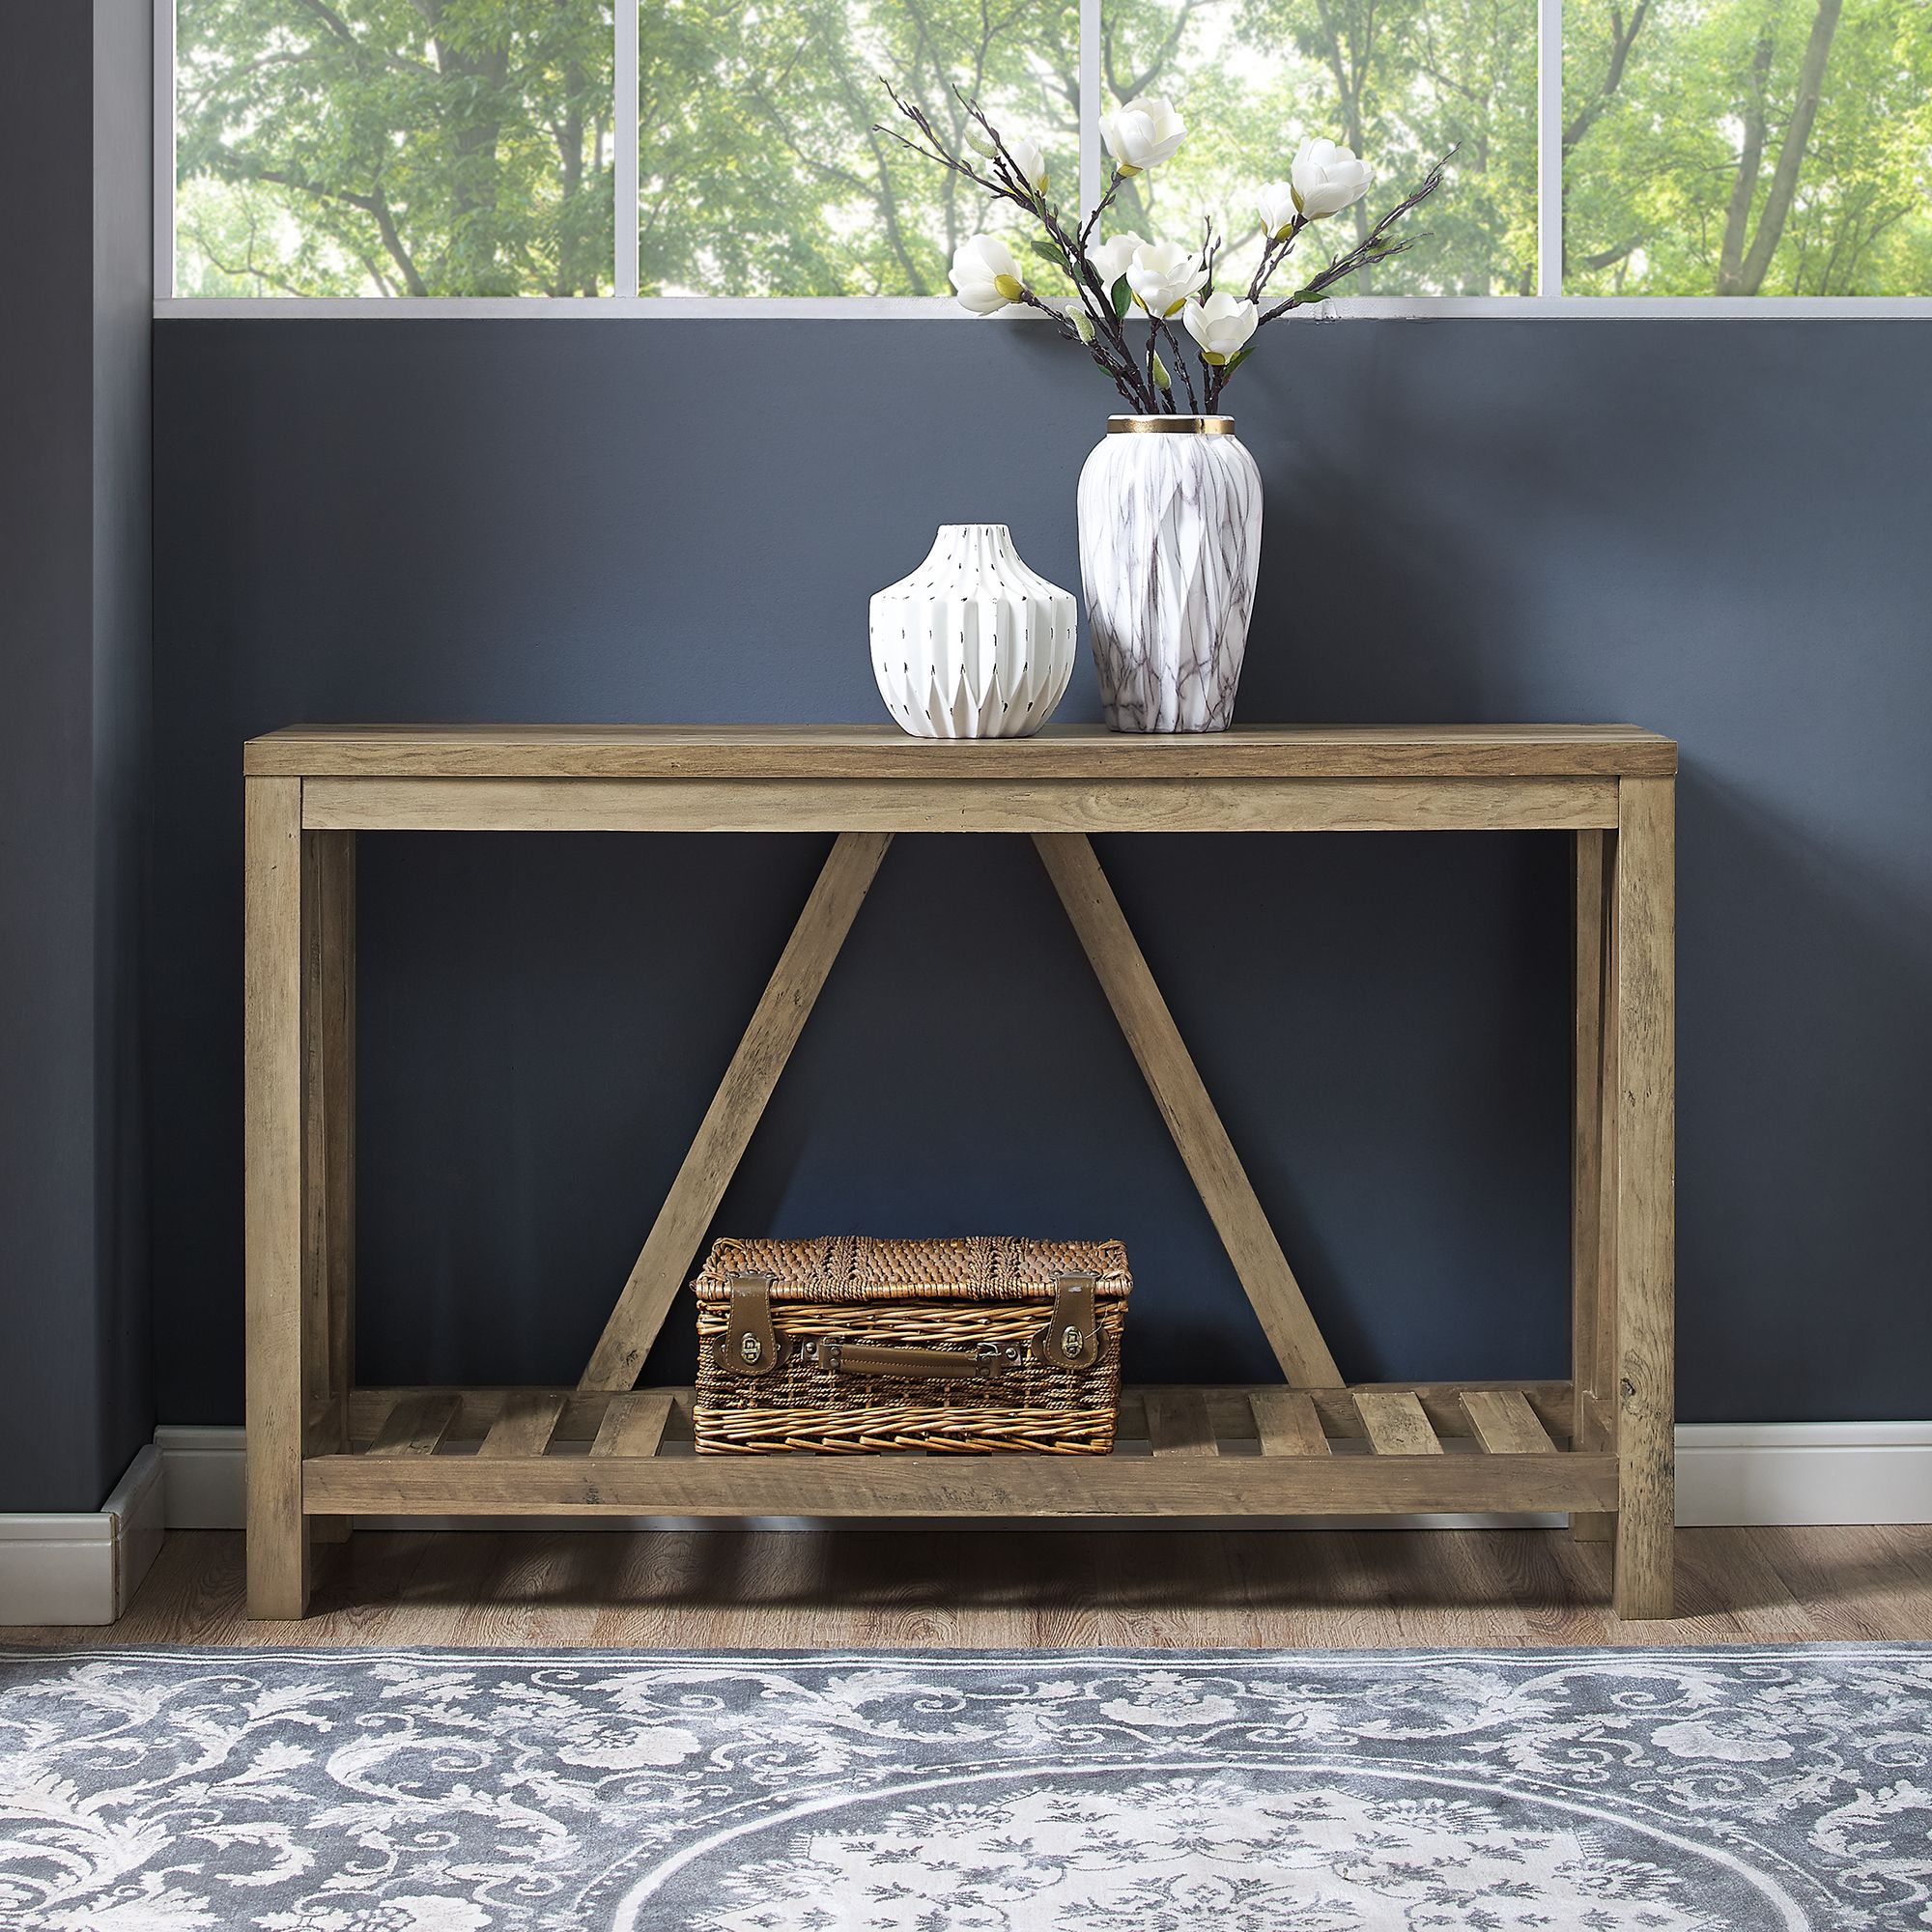 Manor Park 52" A Frame Rustic Entry Console Table, Reclaimed Farmhouse Inside Rustic Barnside Console Tables (View 7 of 20)